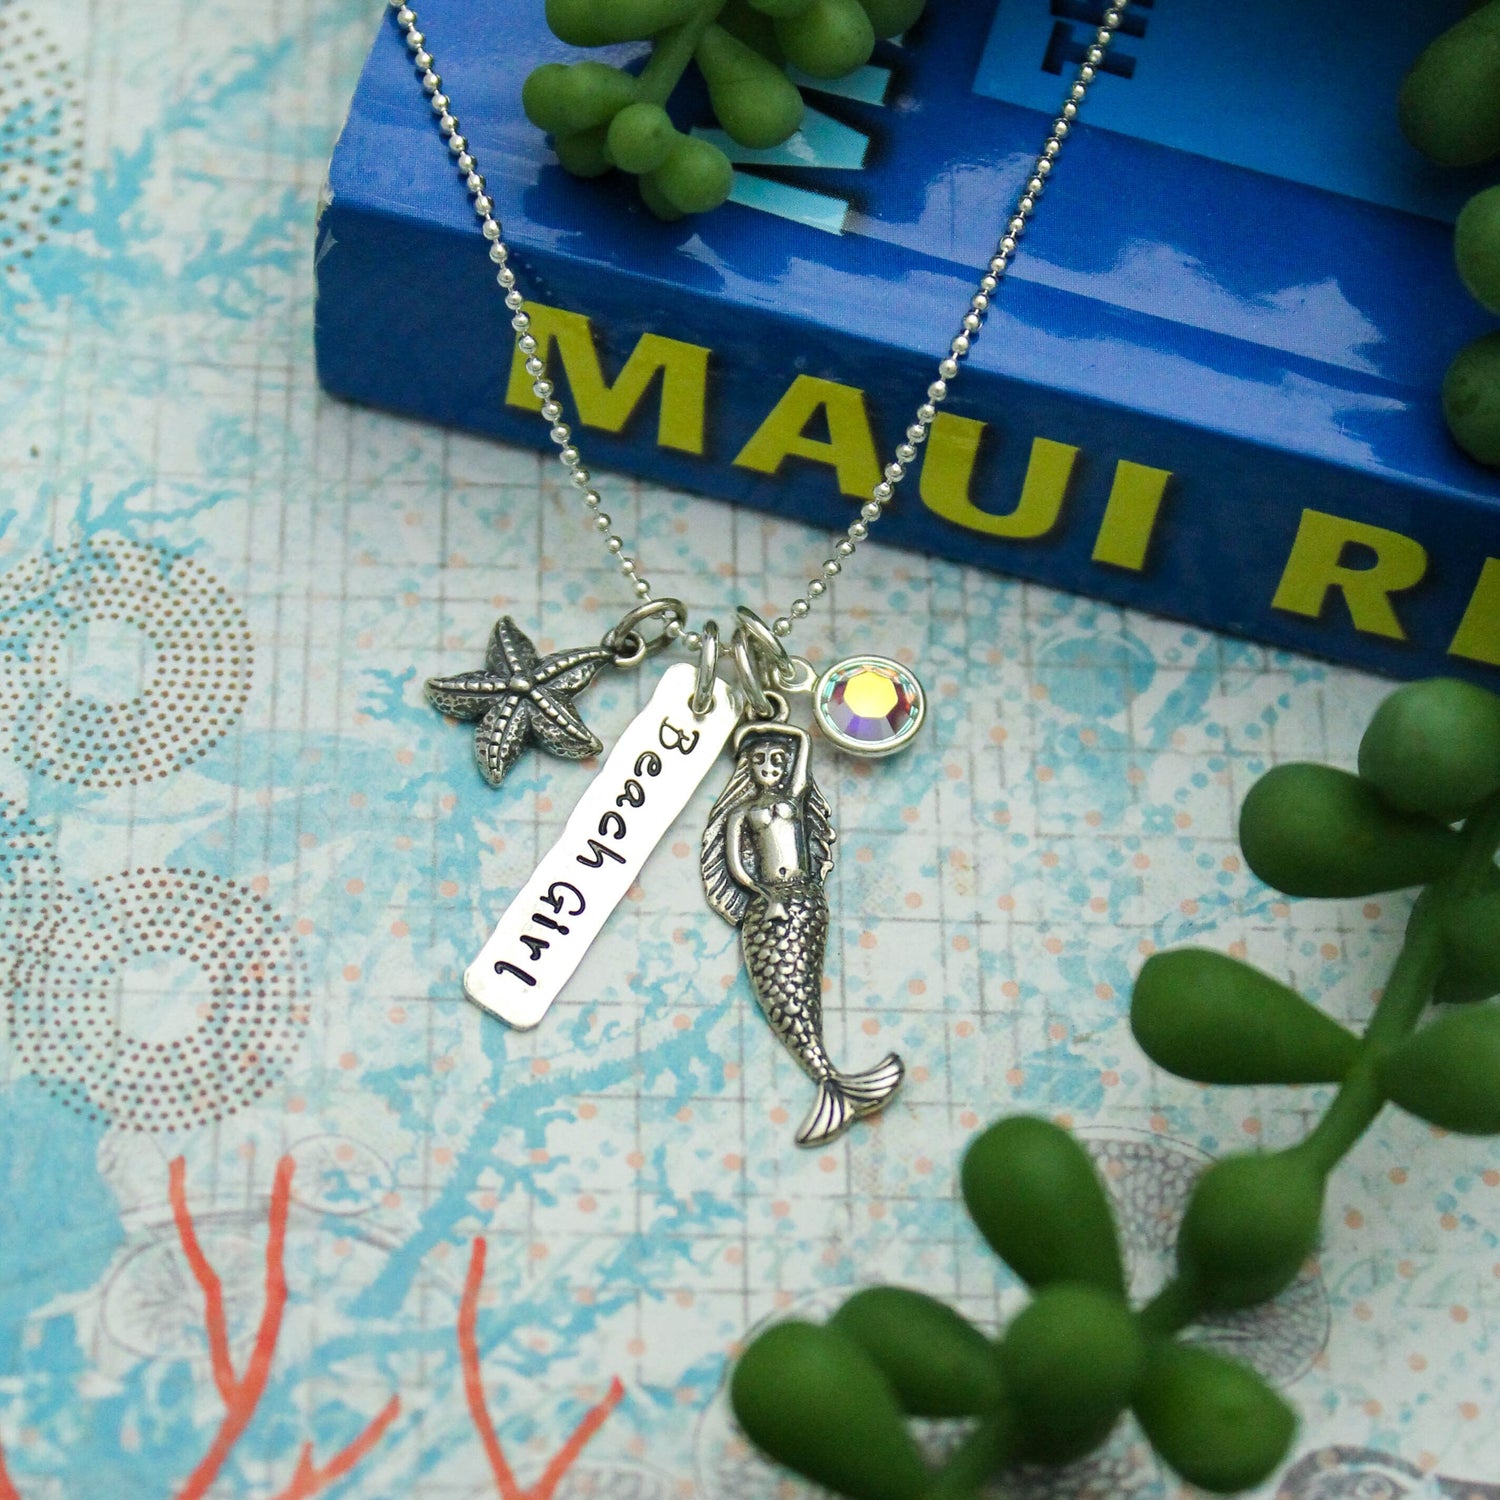 Beach Girl Necklace, Mermaid Necklace, Beach Girl Jewelry, Mermaid Jewelry, Beach Necklace, Vacation Cruise Sterling Silver Hand Stamped